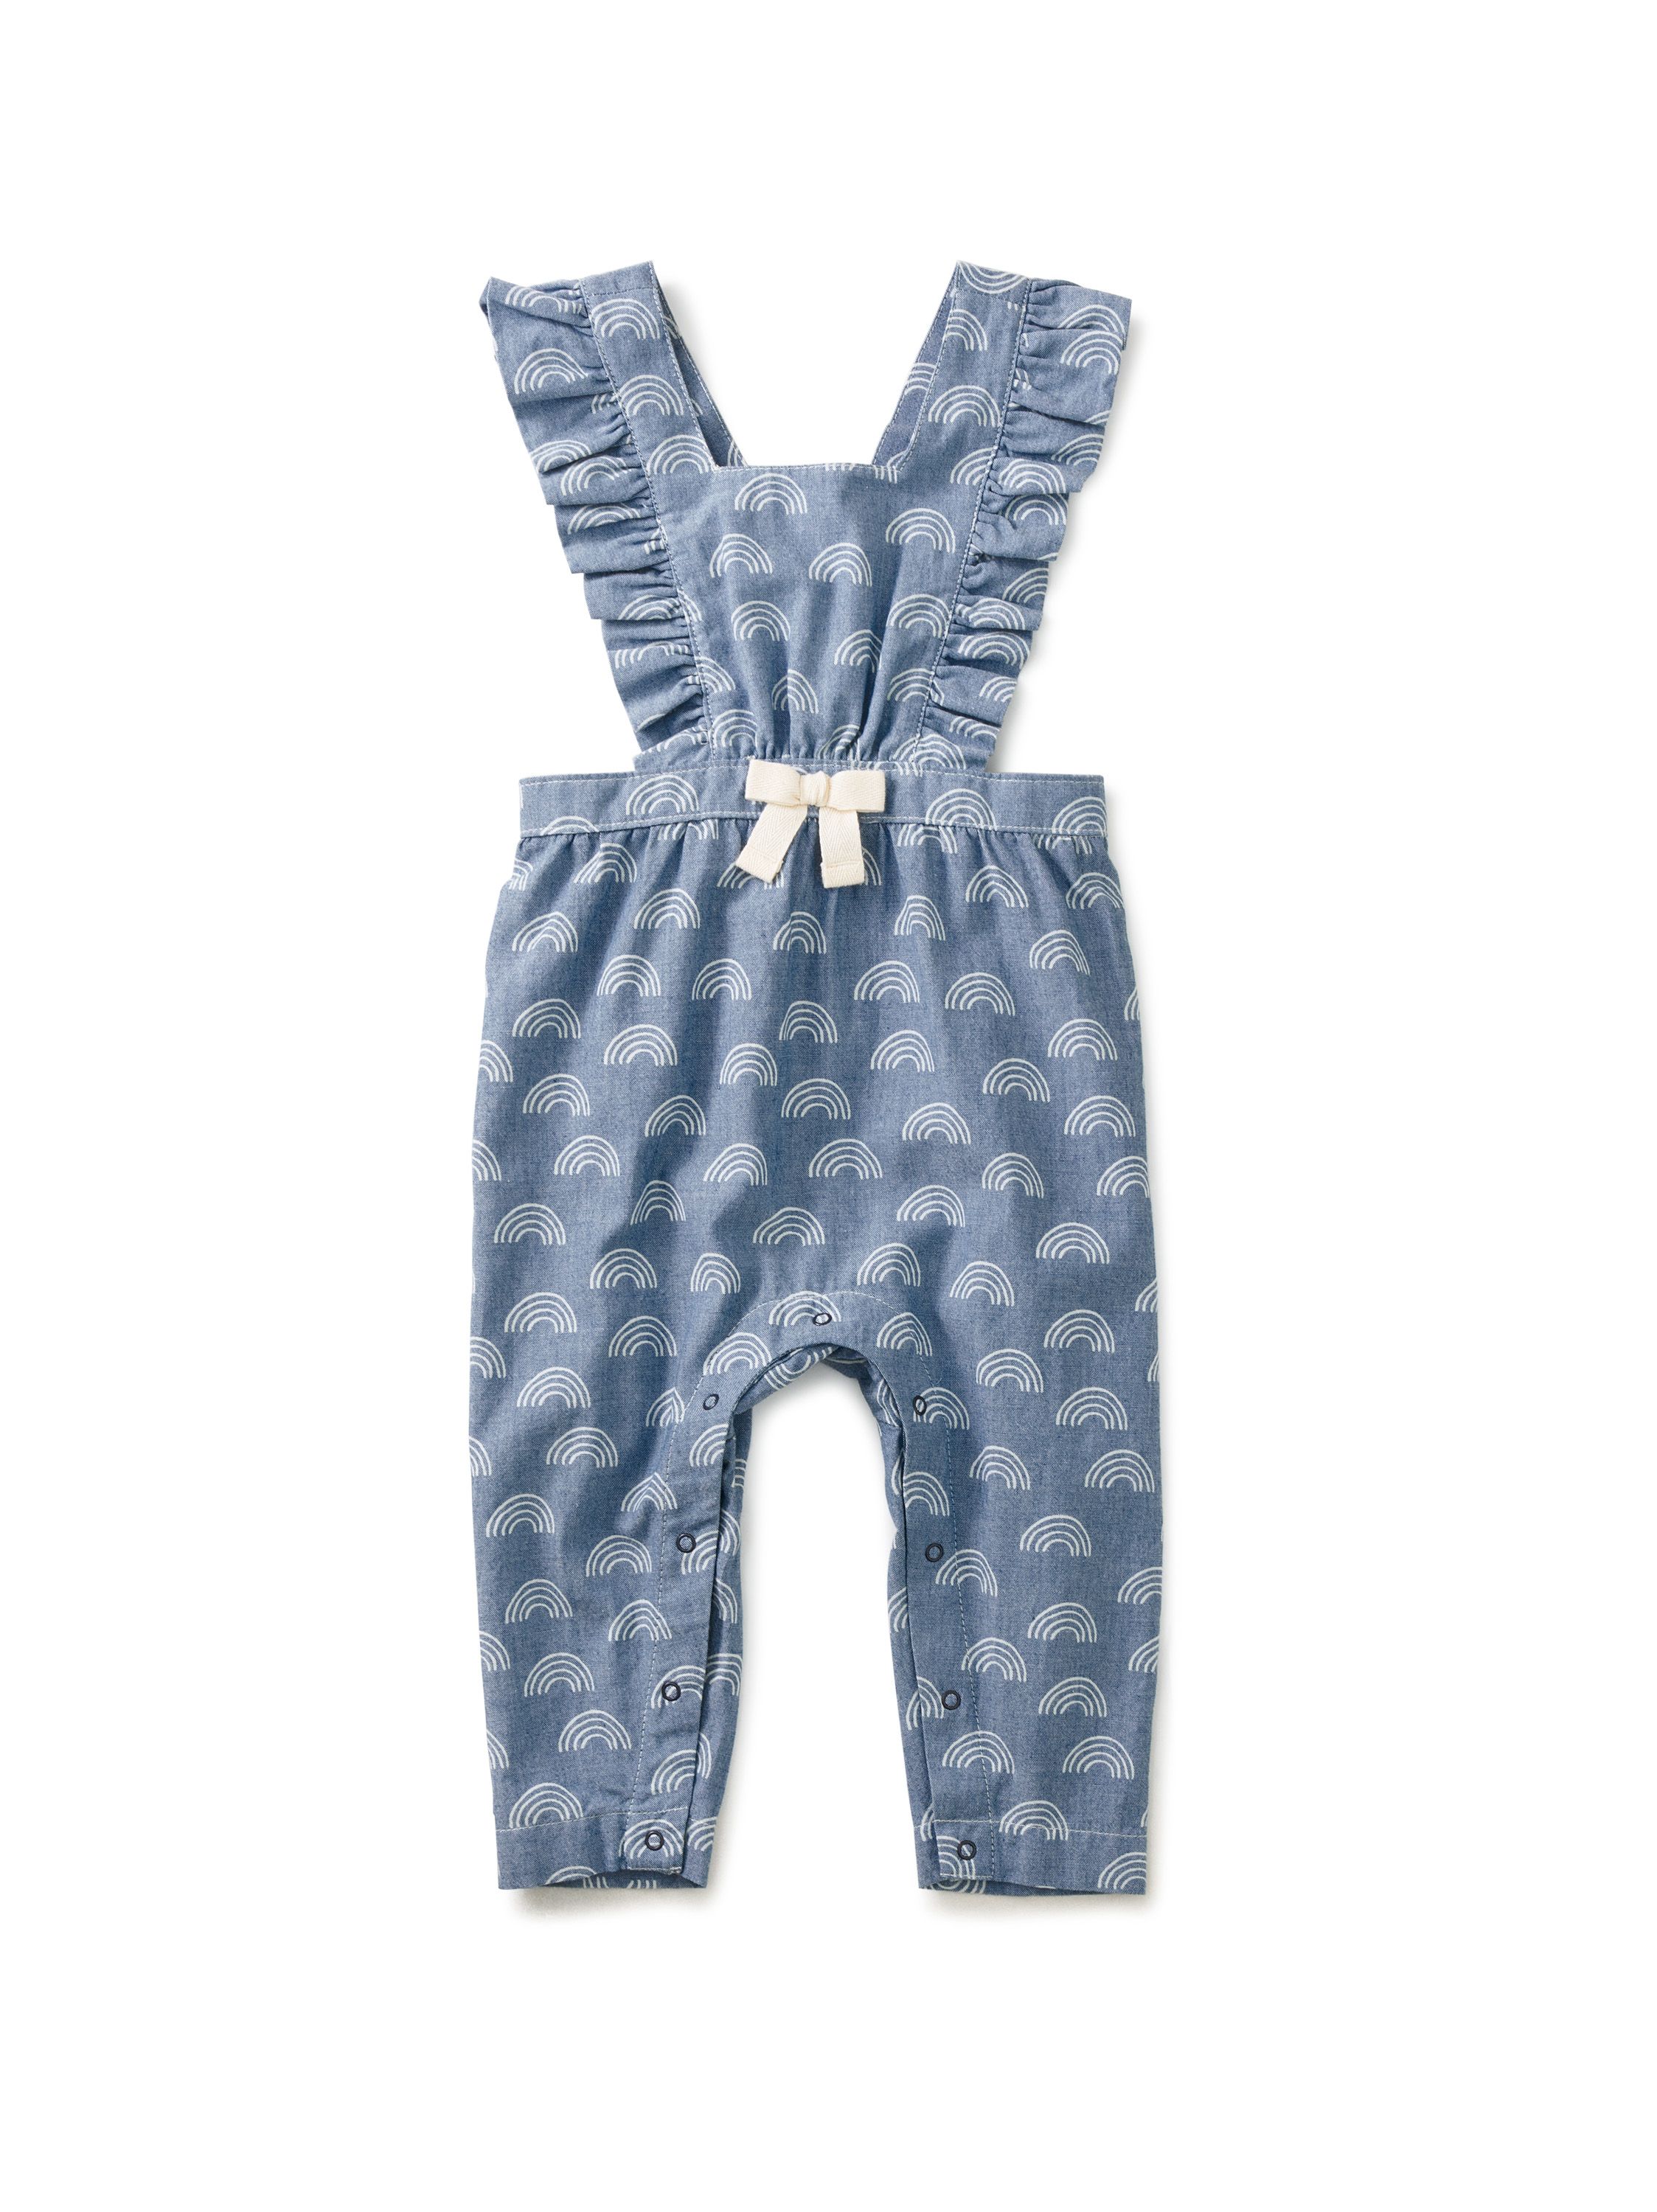 Ruffle Cross-Back Baby Romper | Tea Collection